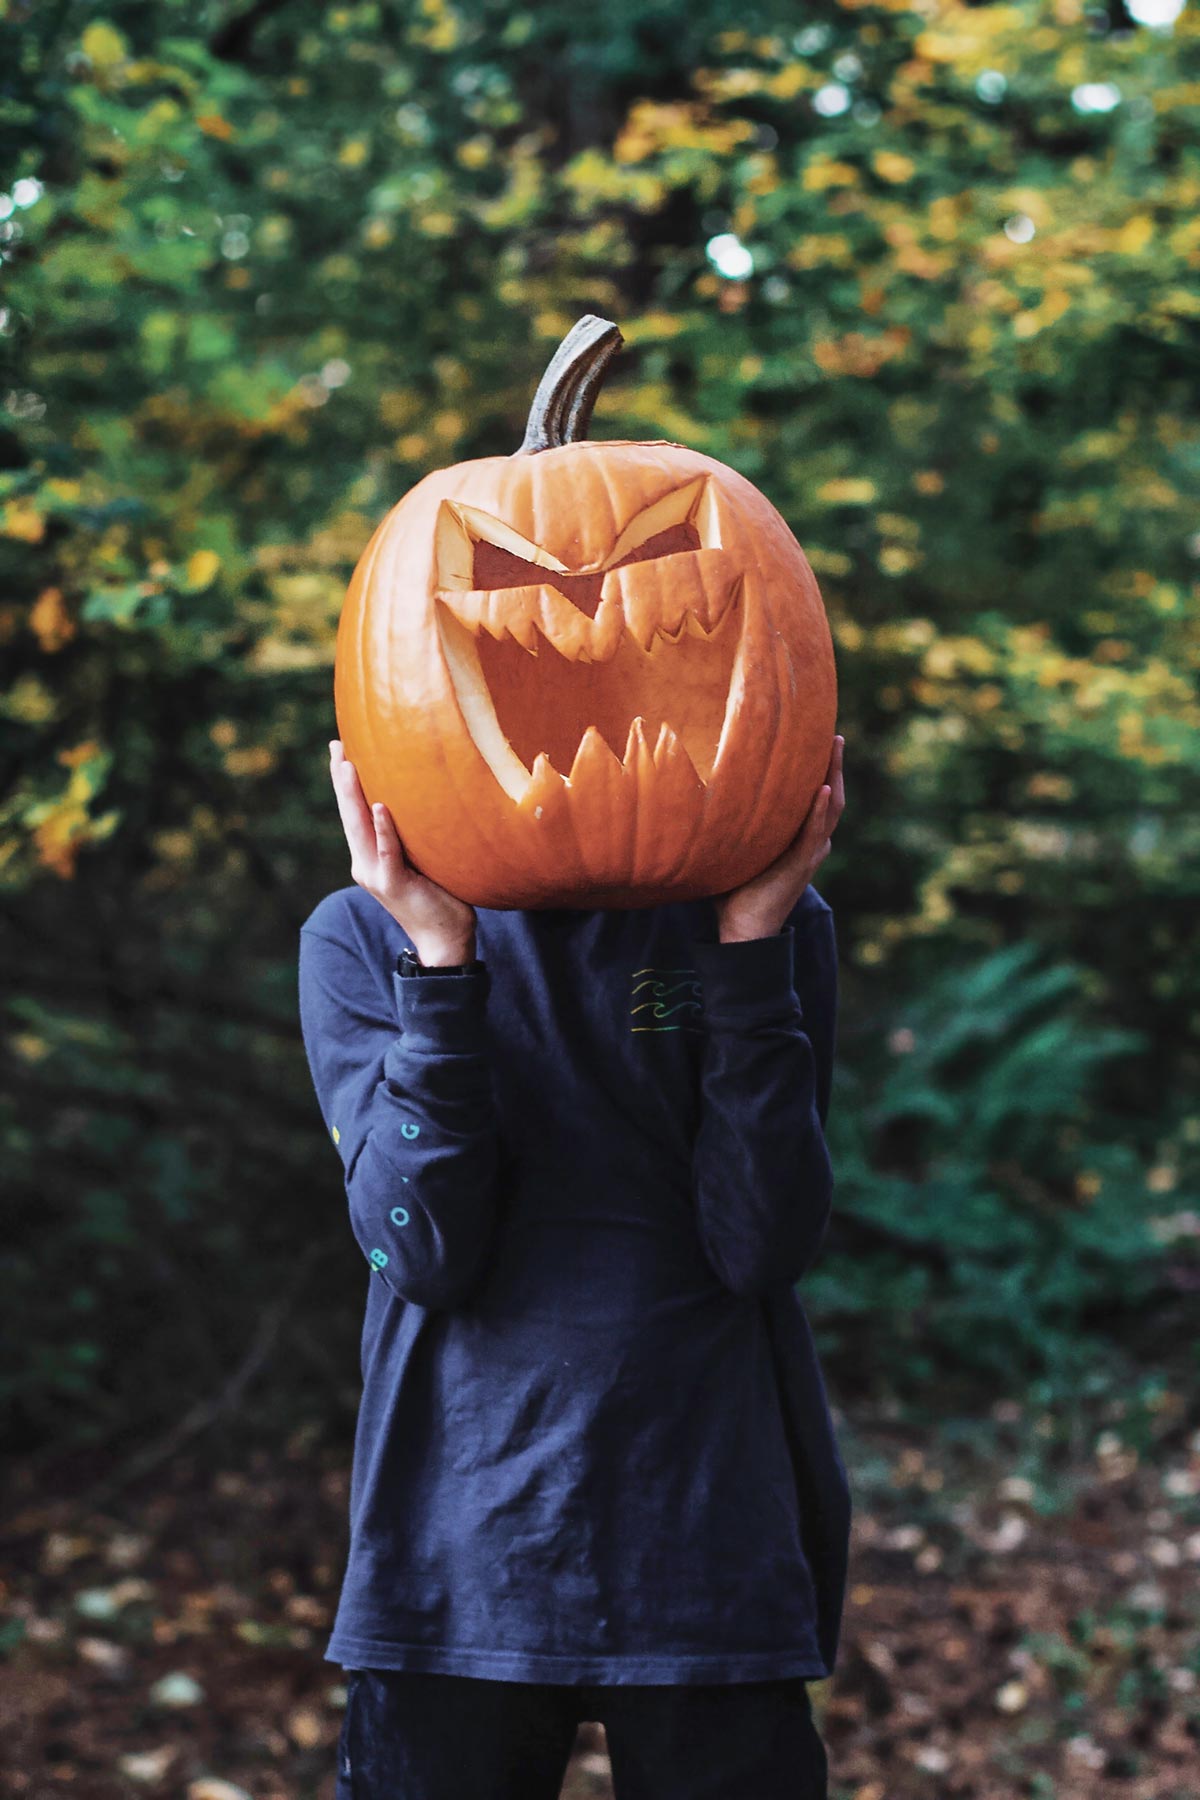 Child Holding a Carved Pumpkin